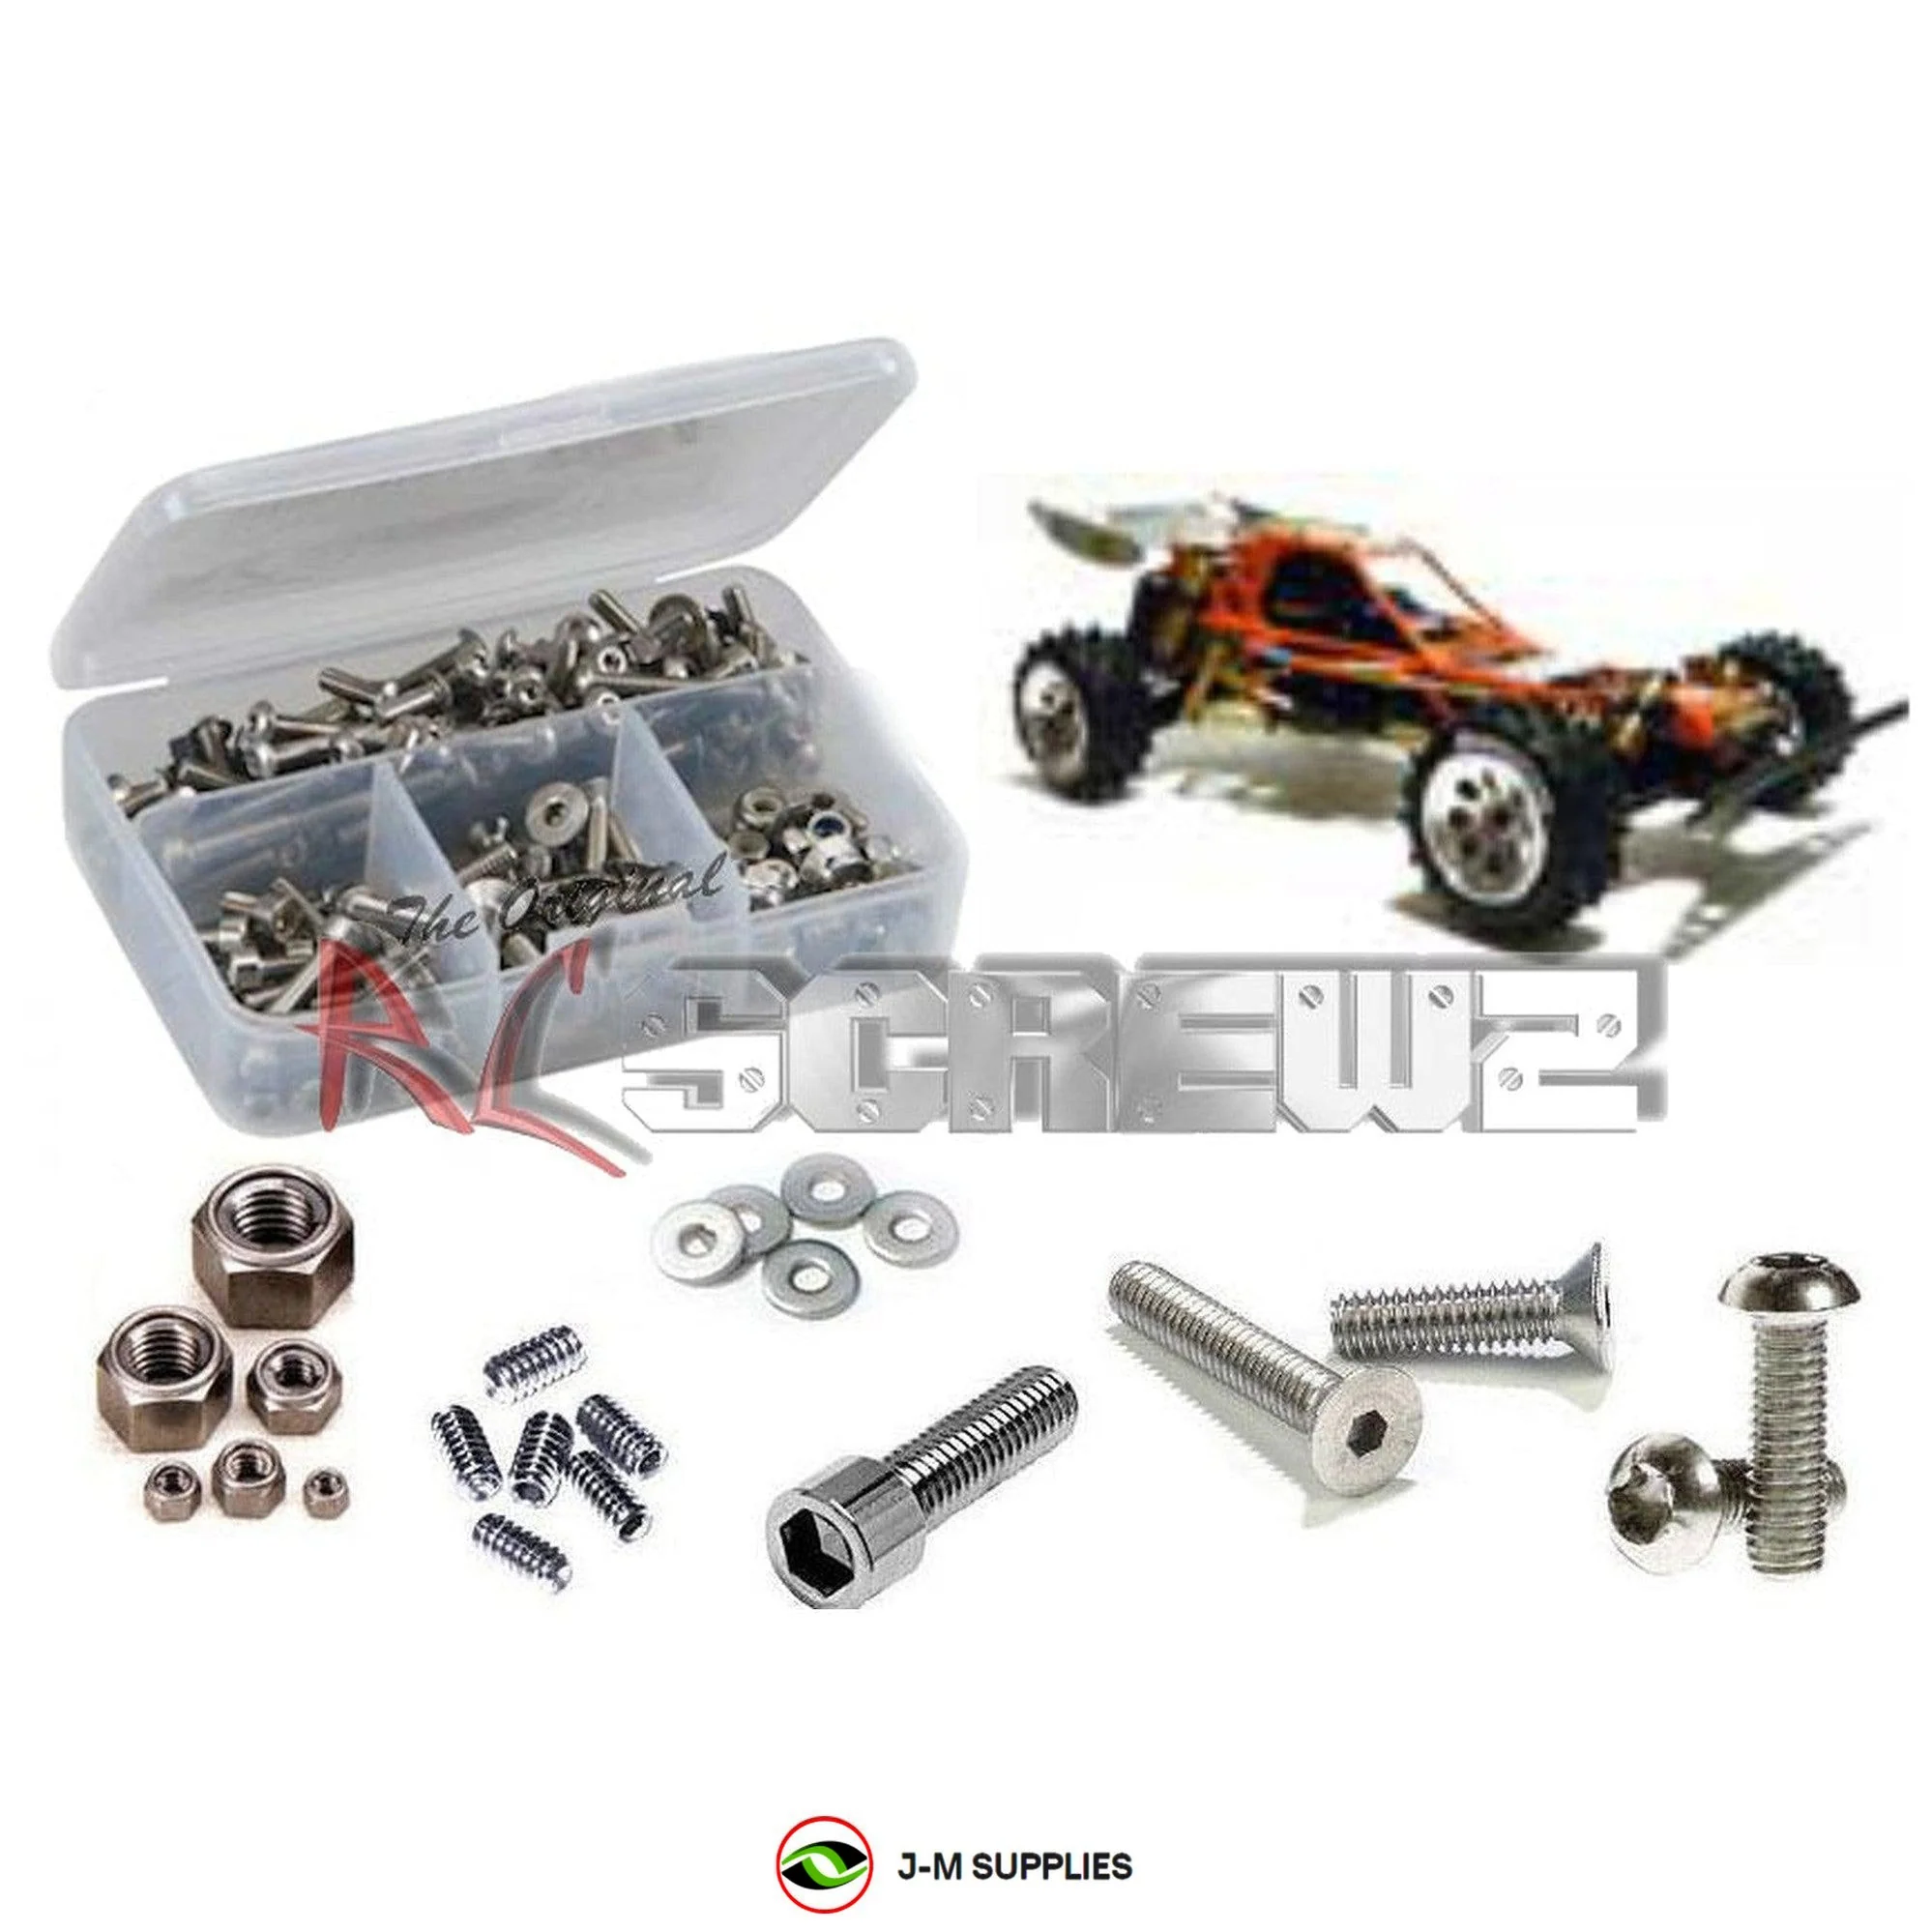 RCScrewZ Stainless Screw Kit+ kyo012 for Kyosho Javelin Vintage/#30618B | PRO - Picture 1 of 12